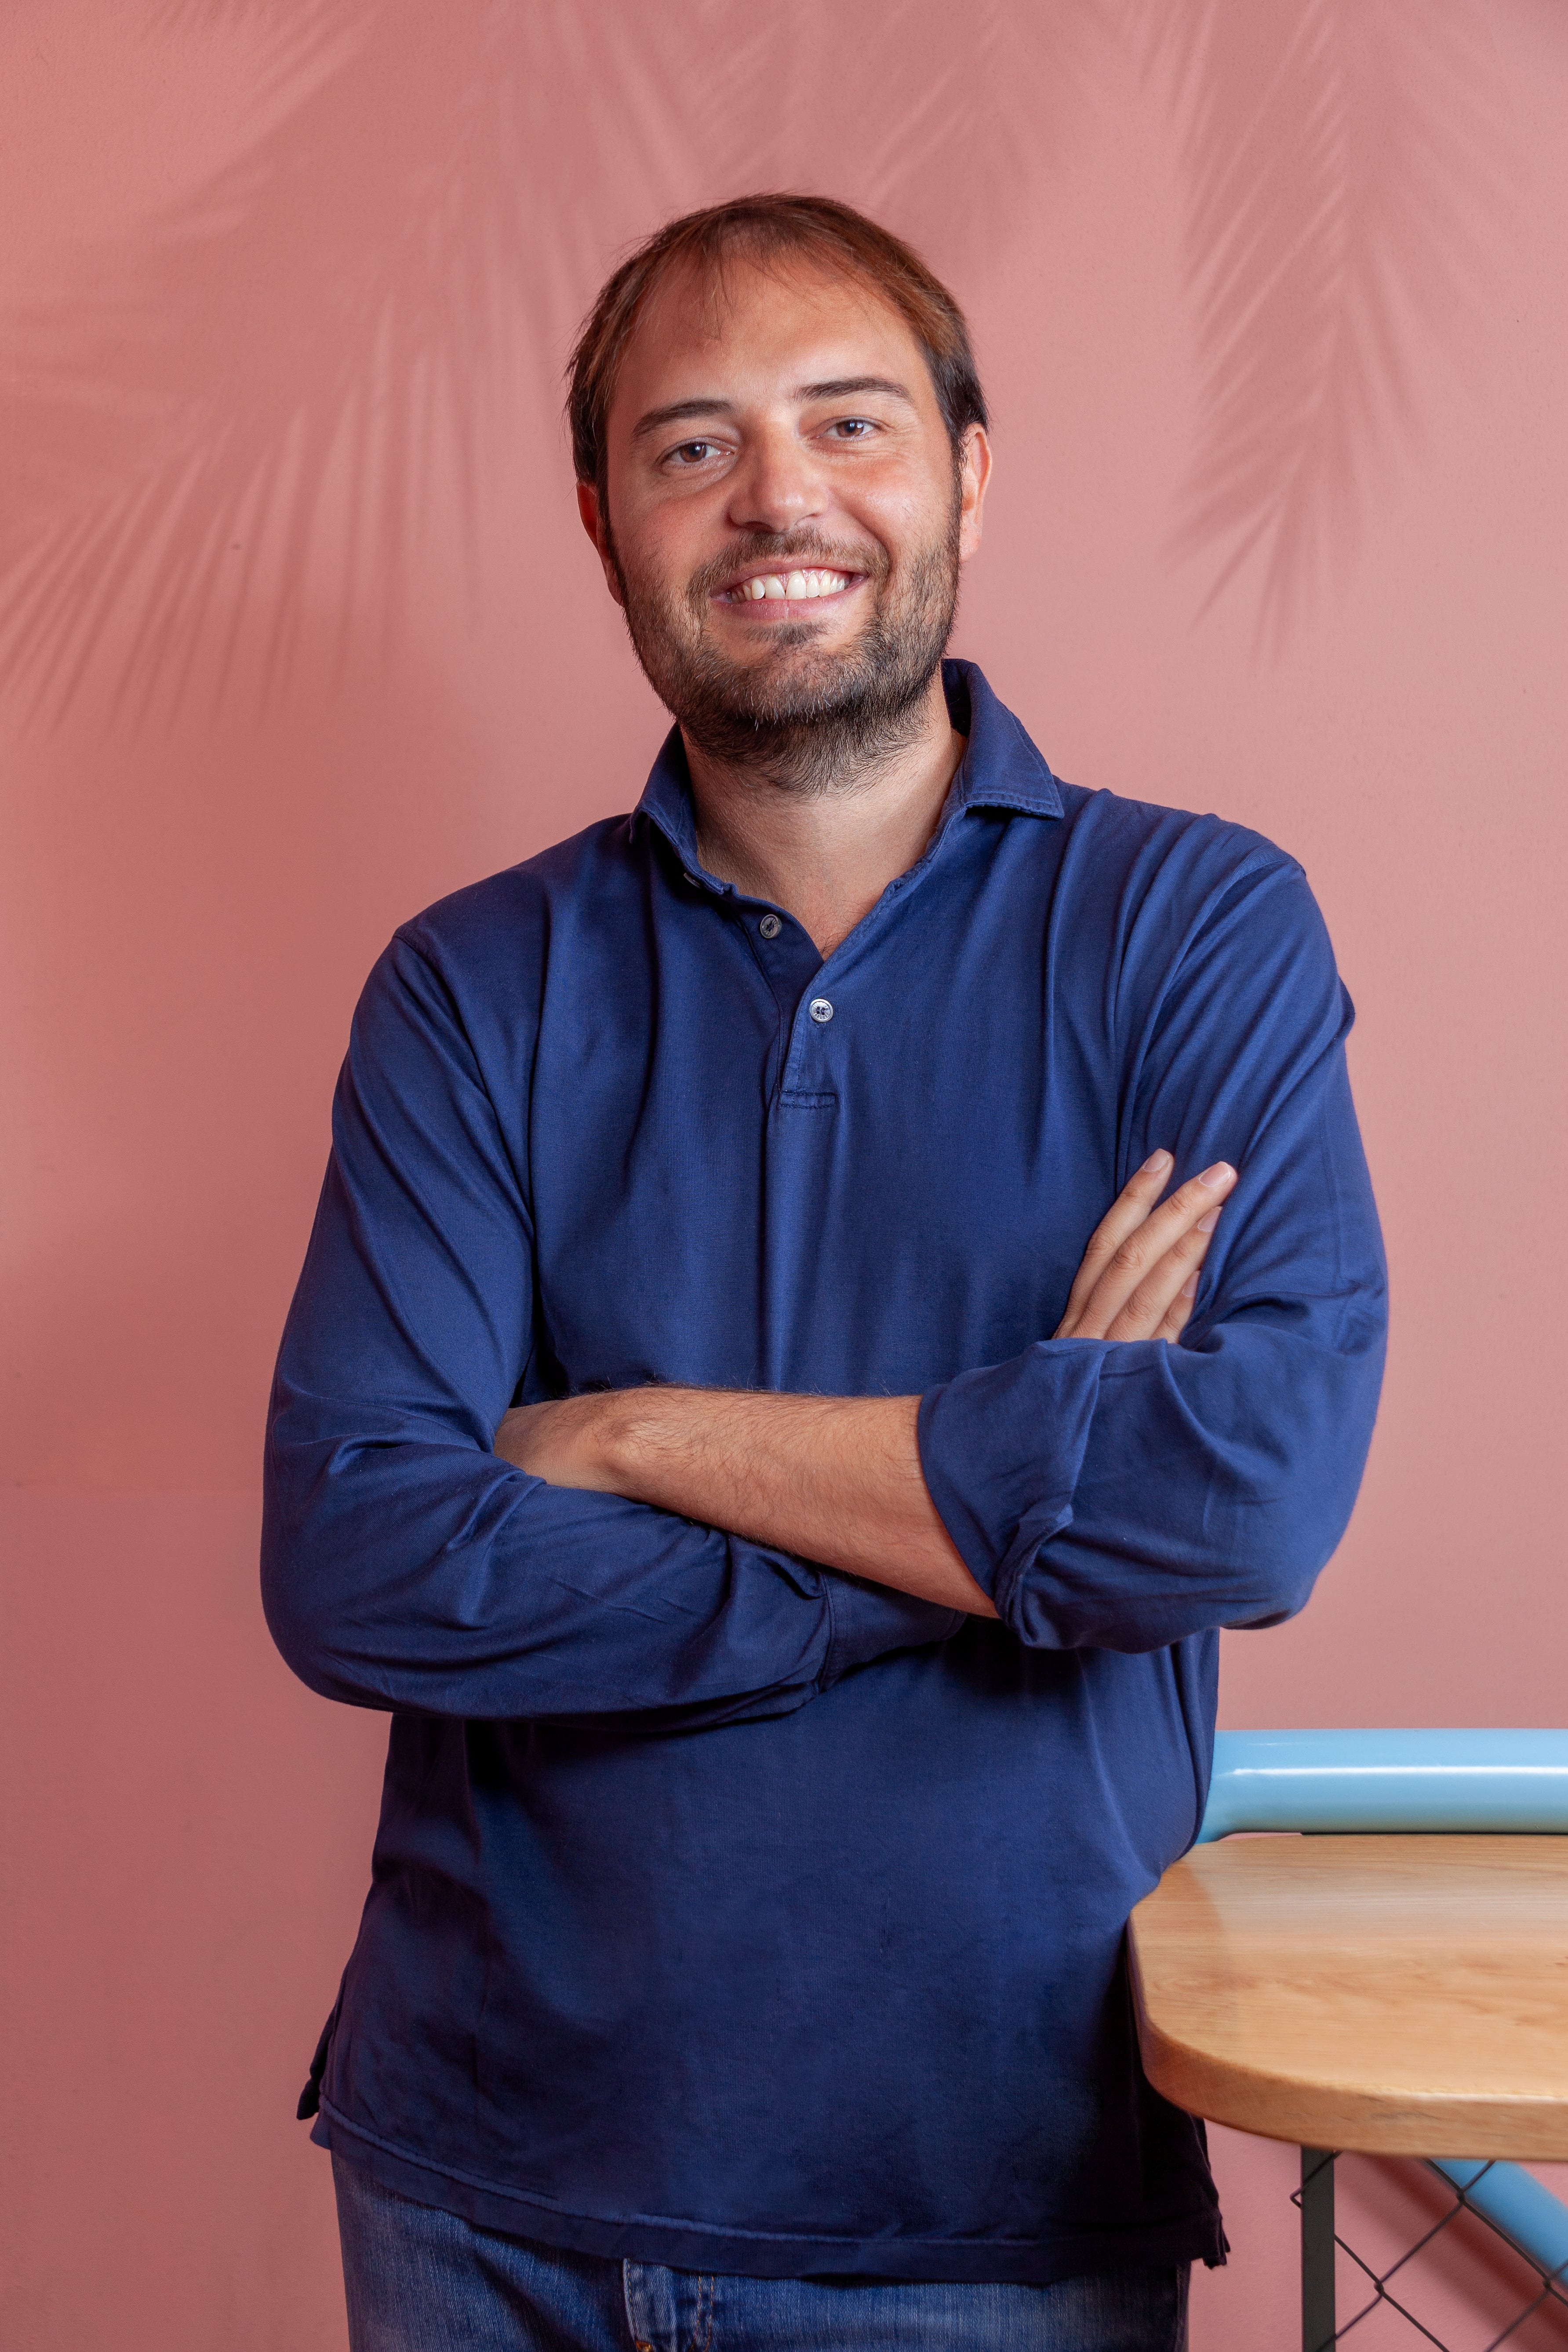 Poke House co-founder Matteo Pichi wants to more than double revenues in 2022 (Poke House/PA)